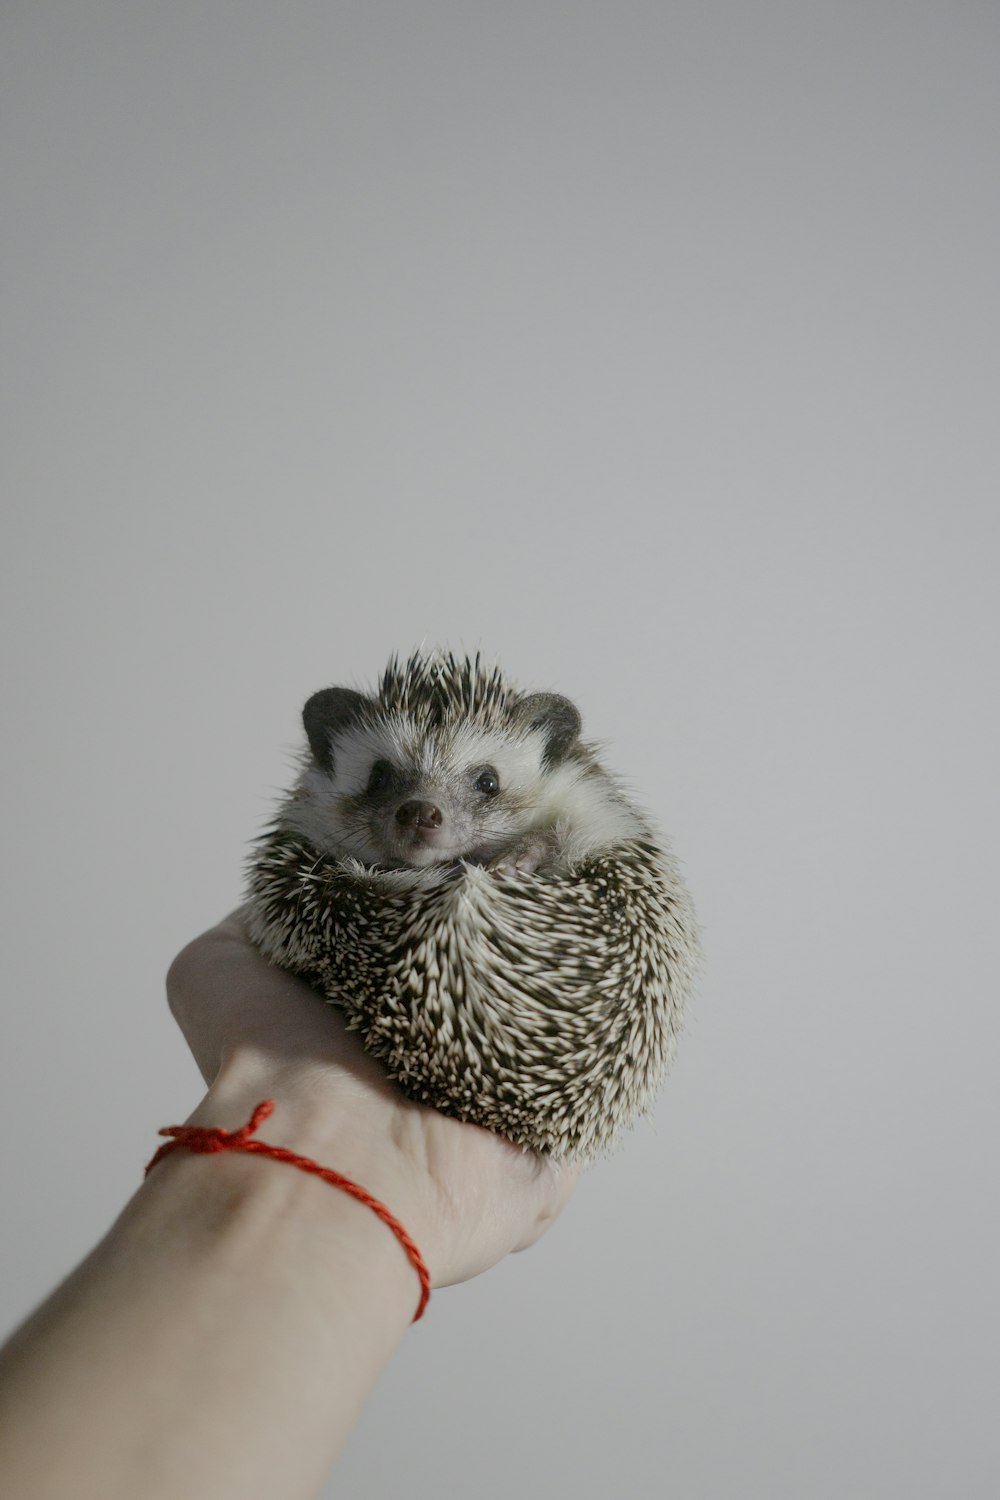 white and black hedgehog on persons hand